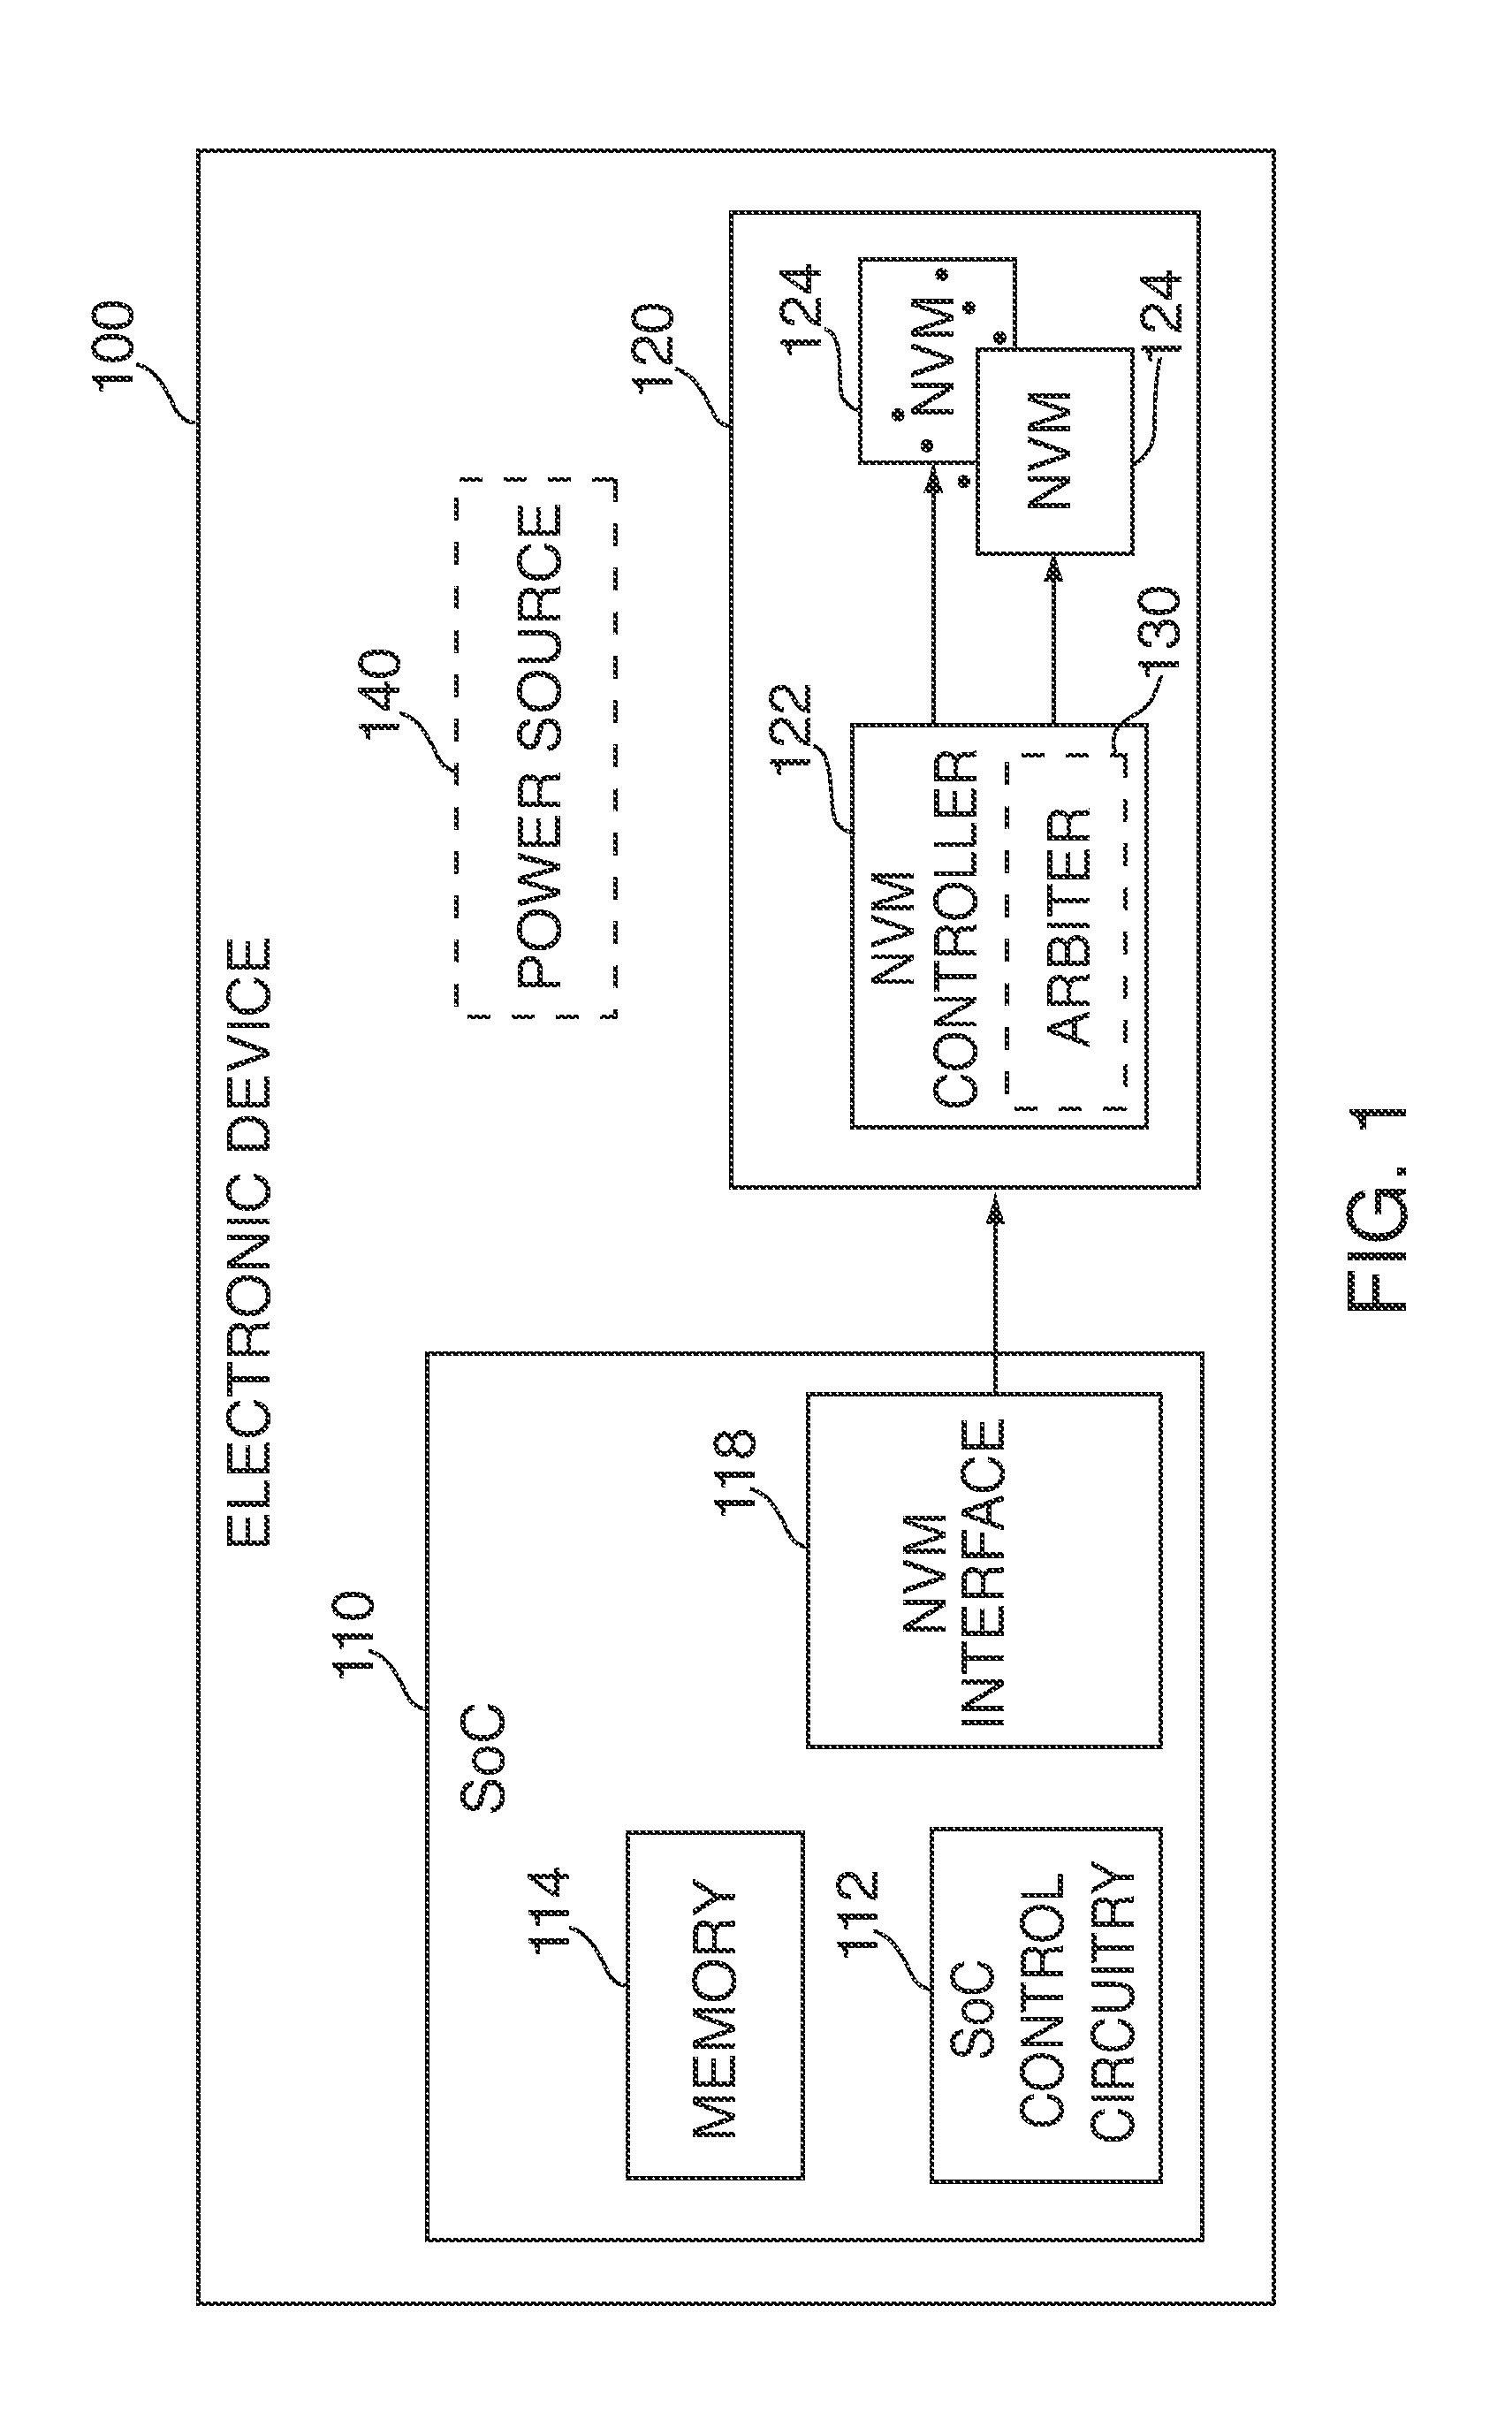 Asynchronous management of access requests to control power consumption